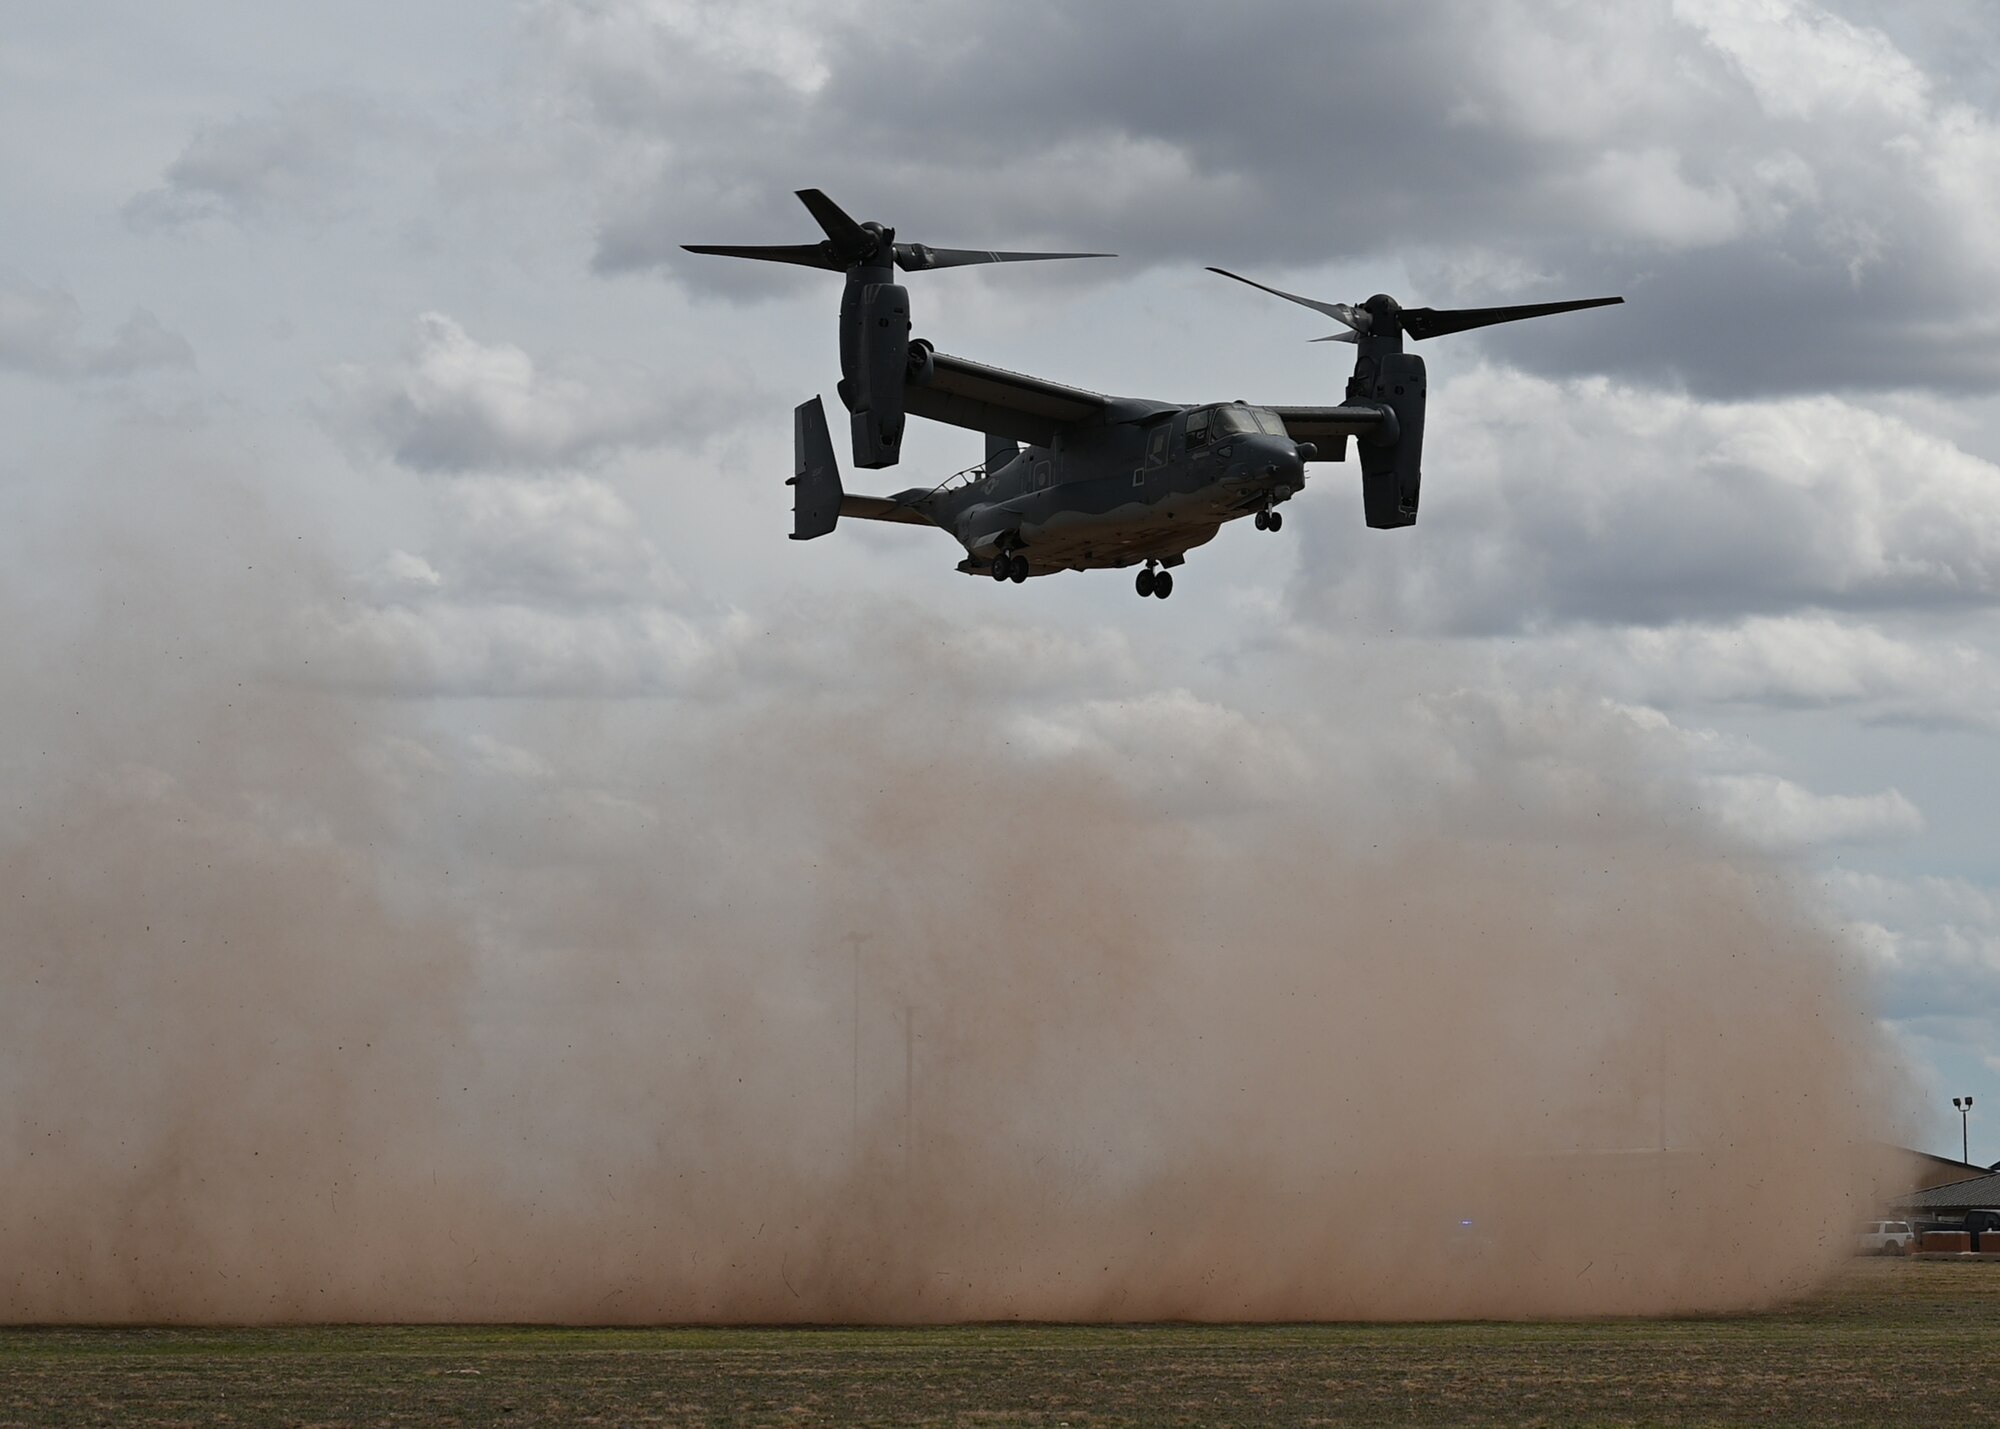 A CV-22 Osprey lands in a field at Goodfellow Air Force Base, Texas, Mar. 16, 2023. The CV-22 Osprey is a tiltrotor aircraft that combines the vertical takeoff, hover and vertical landing qualities of a helicopter with the long-range, fuel efficiency and speed characteristics of a turboprop aircraft. (U.S. Air Force photo by Airman 1st Class Zachary Heimbuch)